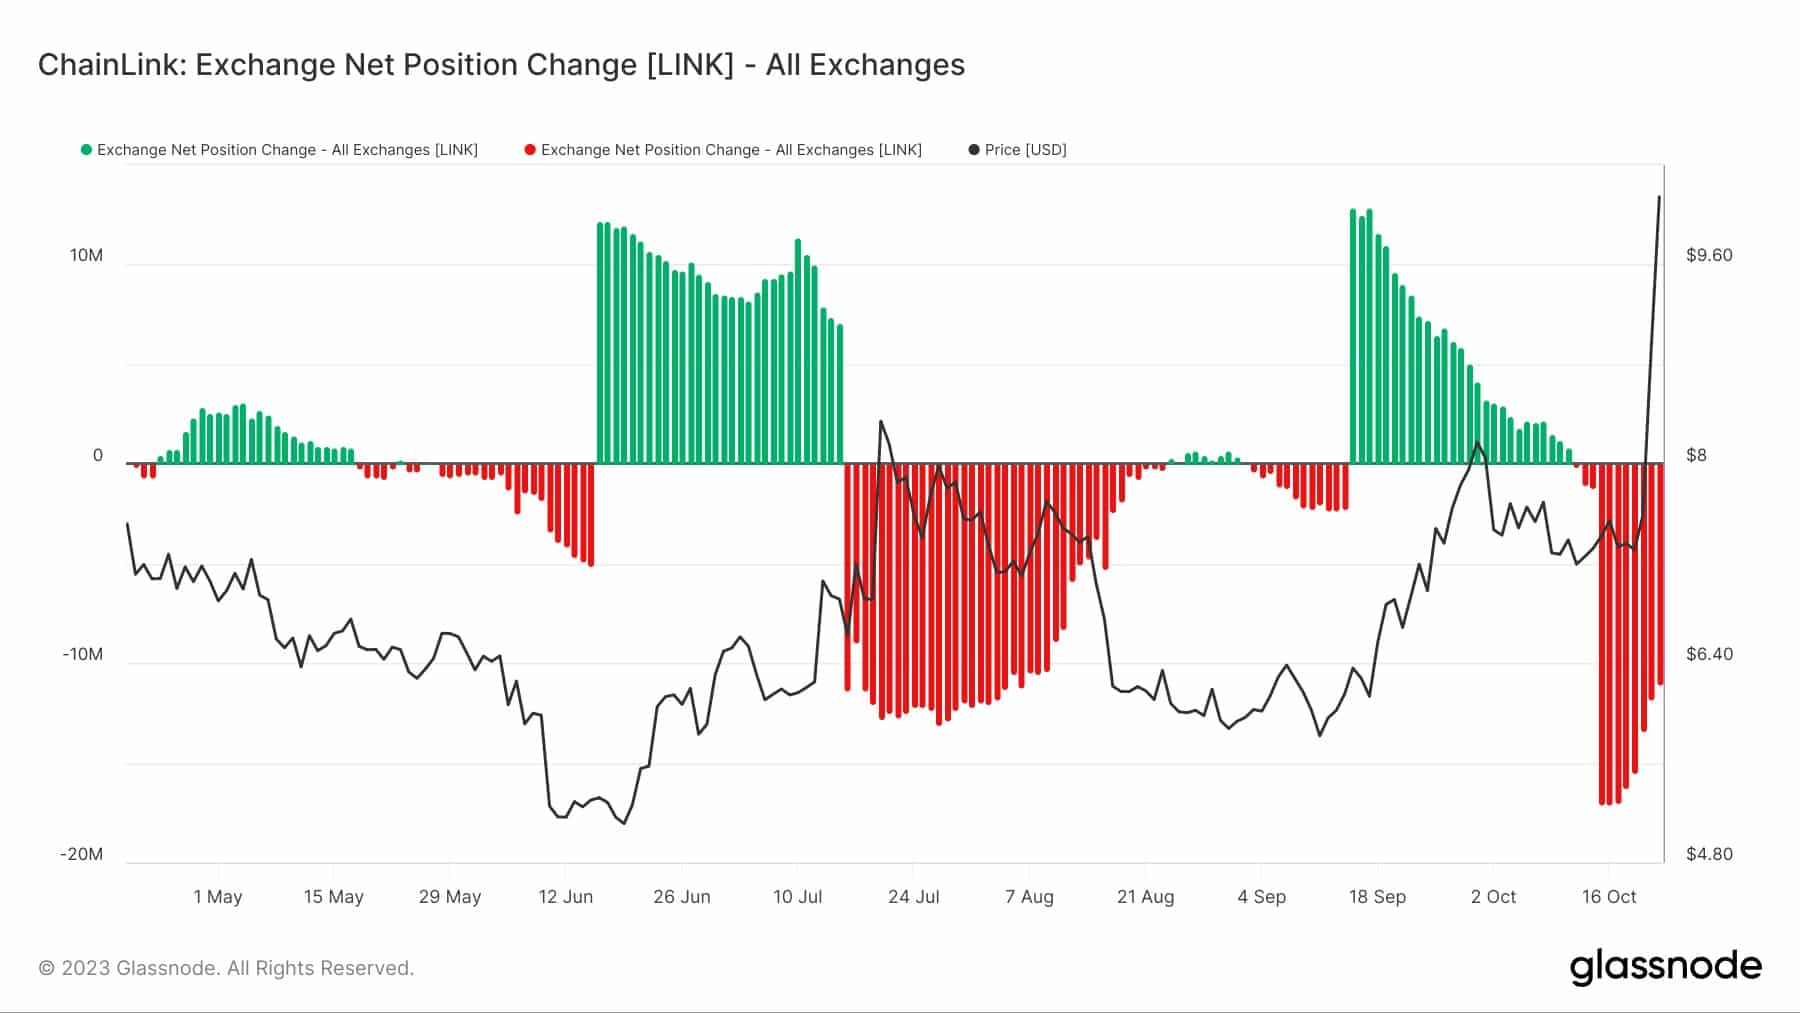 LINK net inflows and outflows on exchanges over the past 6 months